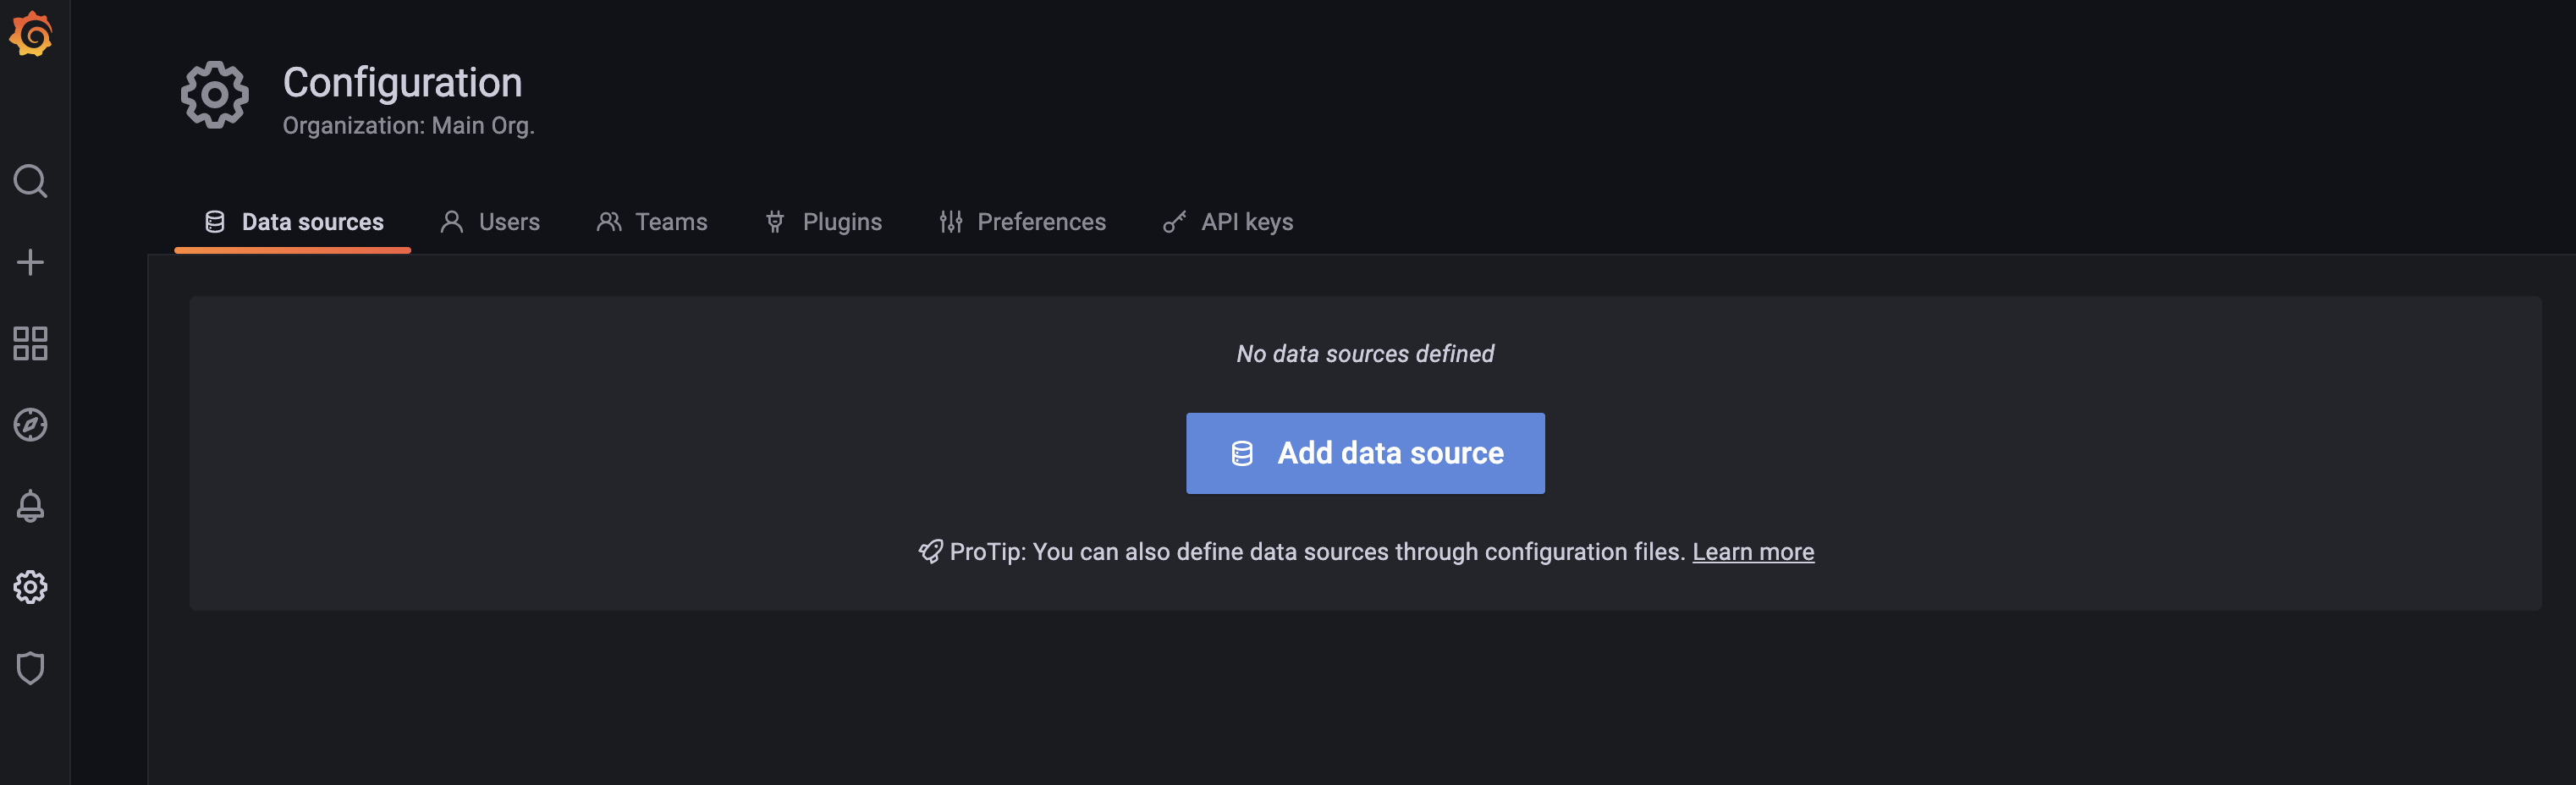 Screencapture showing the button for adding a data source in Grafana